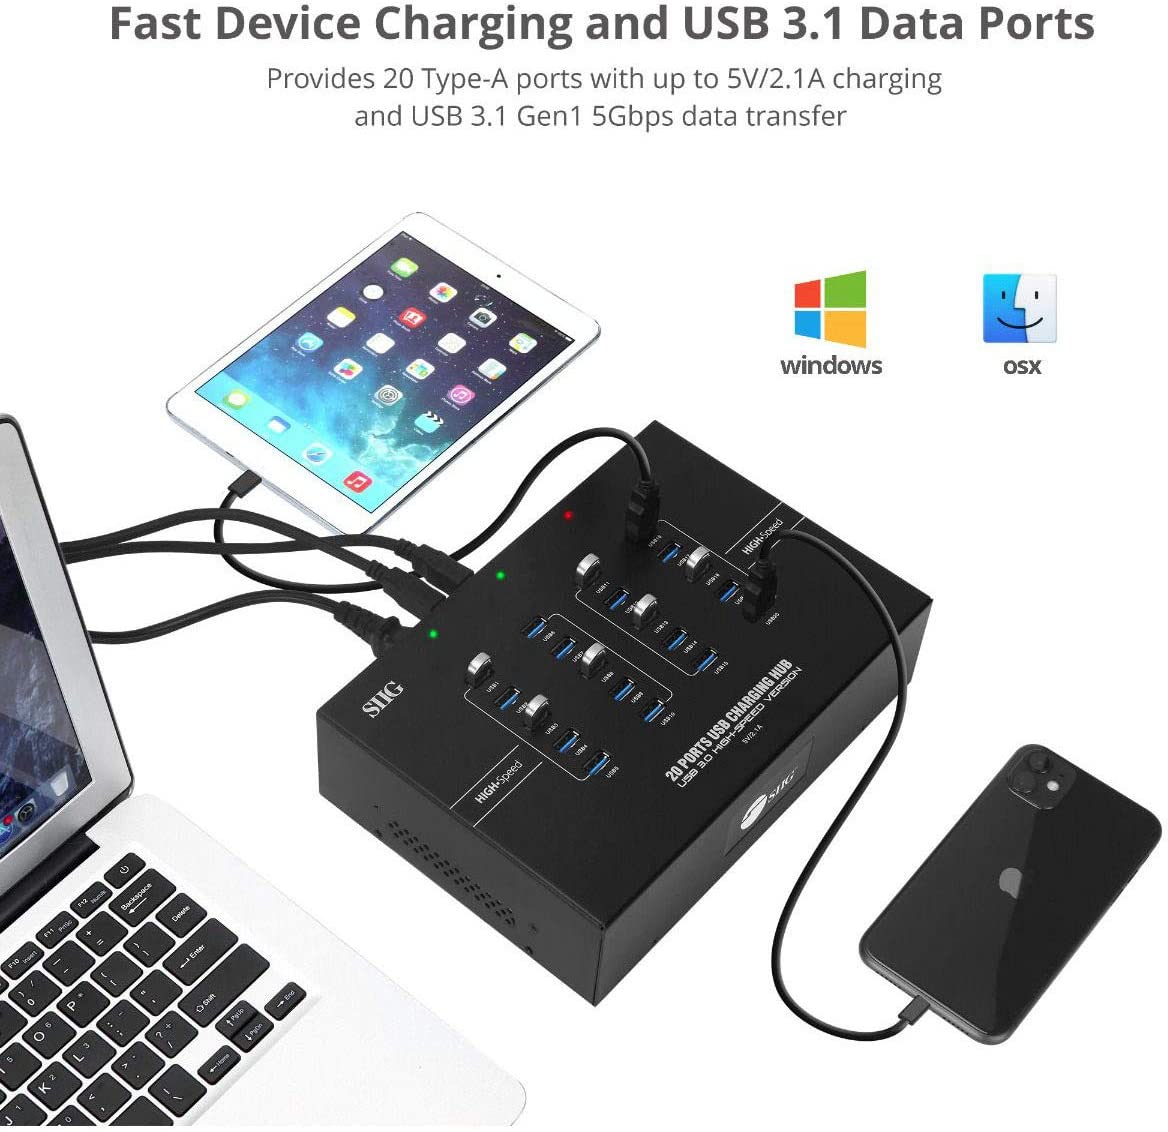 SIIG 20-Port Industrial USB 3.0 Hub with Charging and High Speed Data Transfer Sync (5Gbps) - Includes Sturdy Metal Casing and Cooling Fan (ID-US0611-S1)